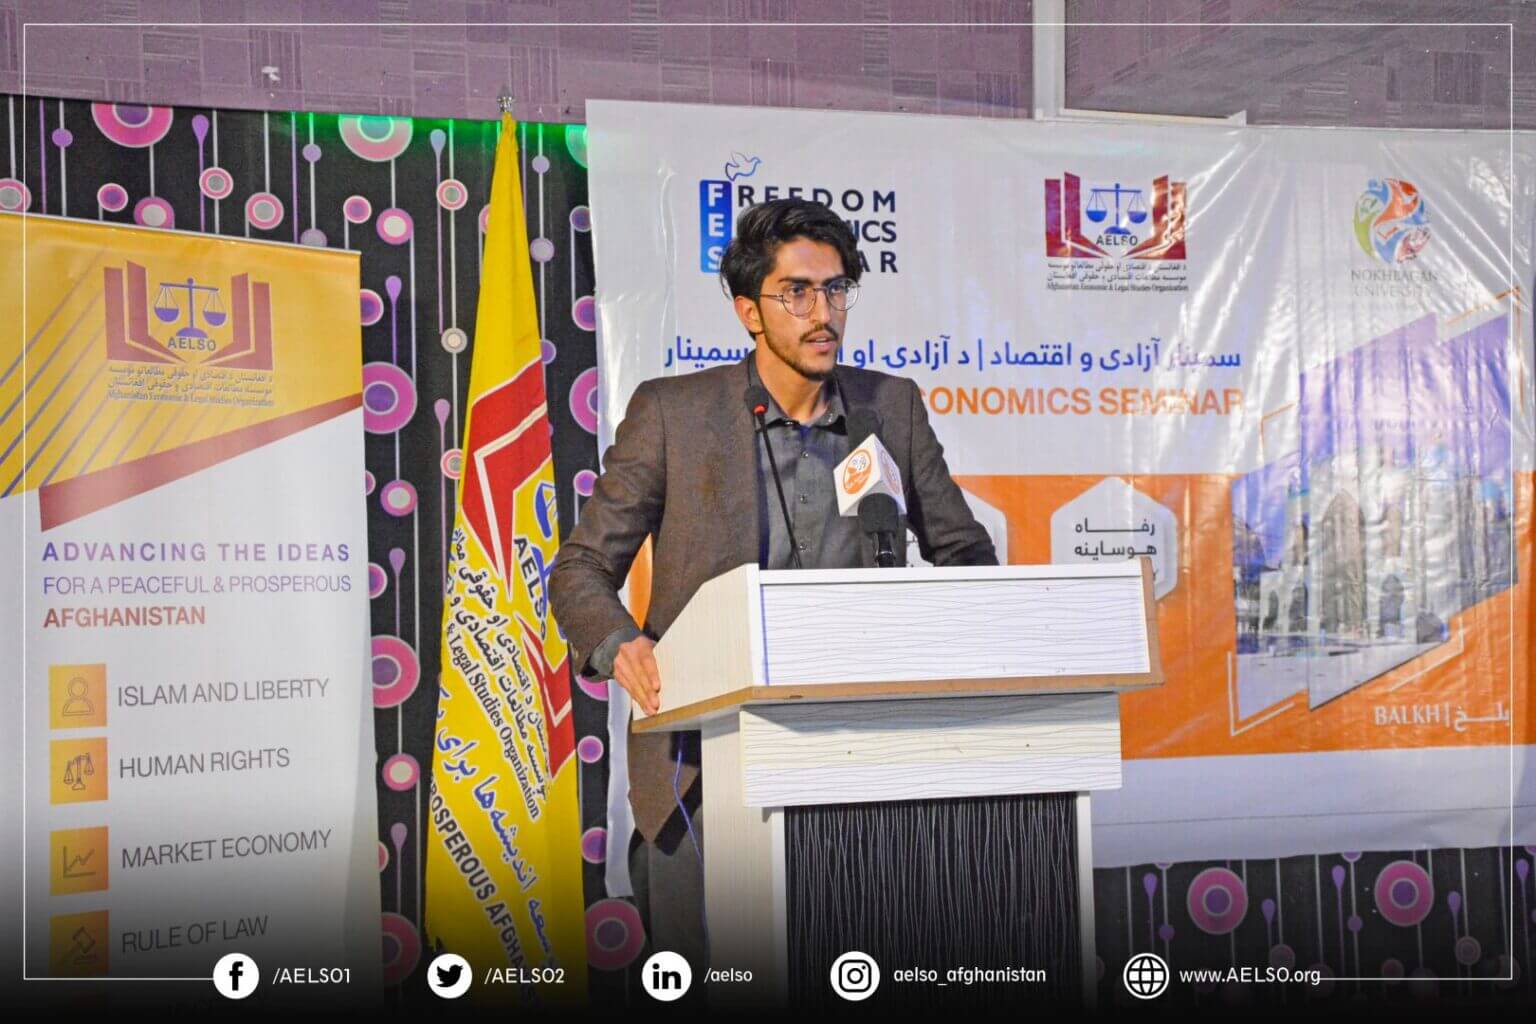 Sayed Zekria Yousefi, participant of Freedom & Economics Seminar in Balkh province